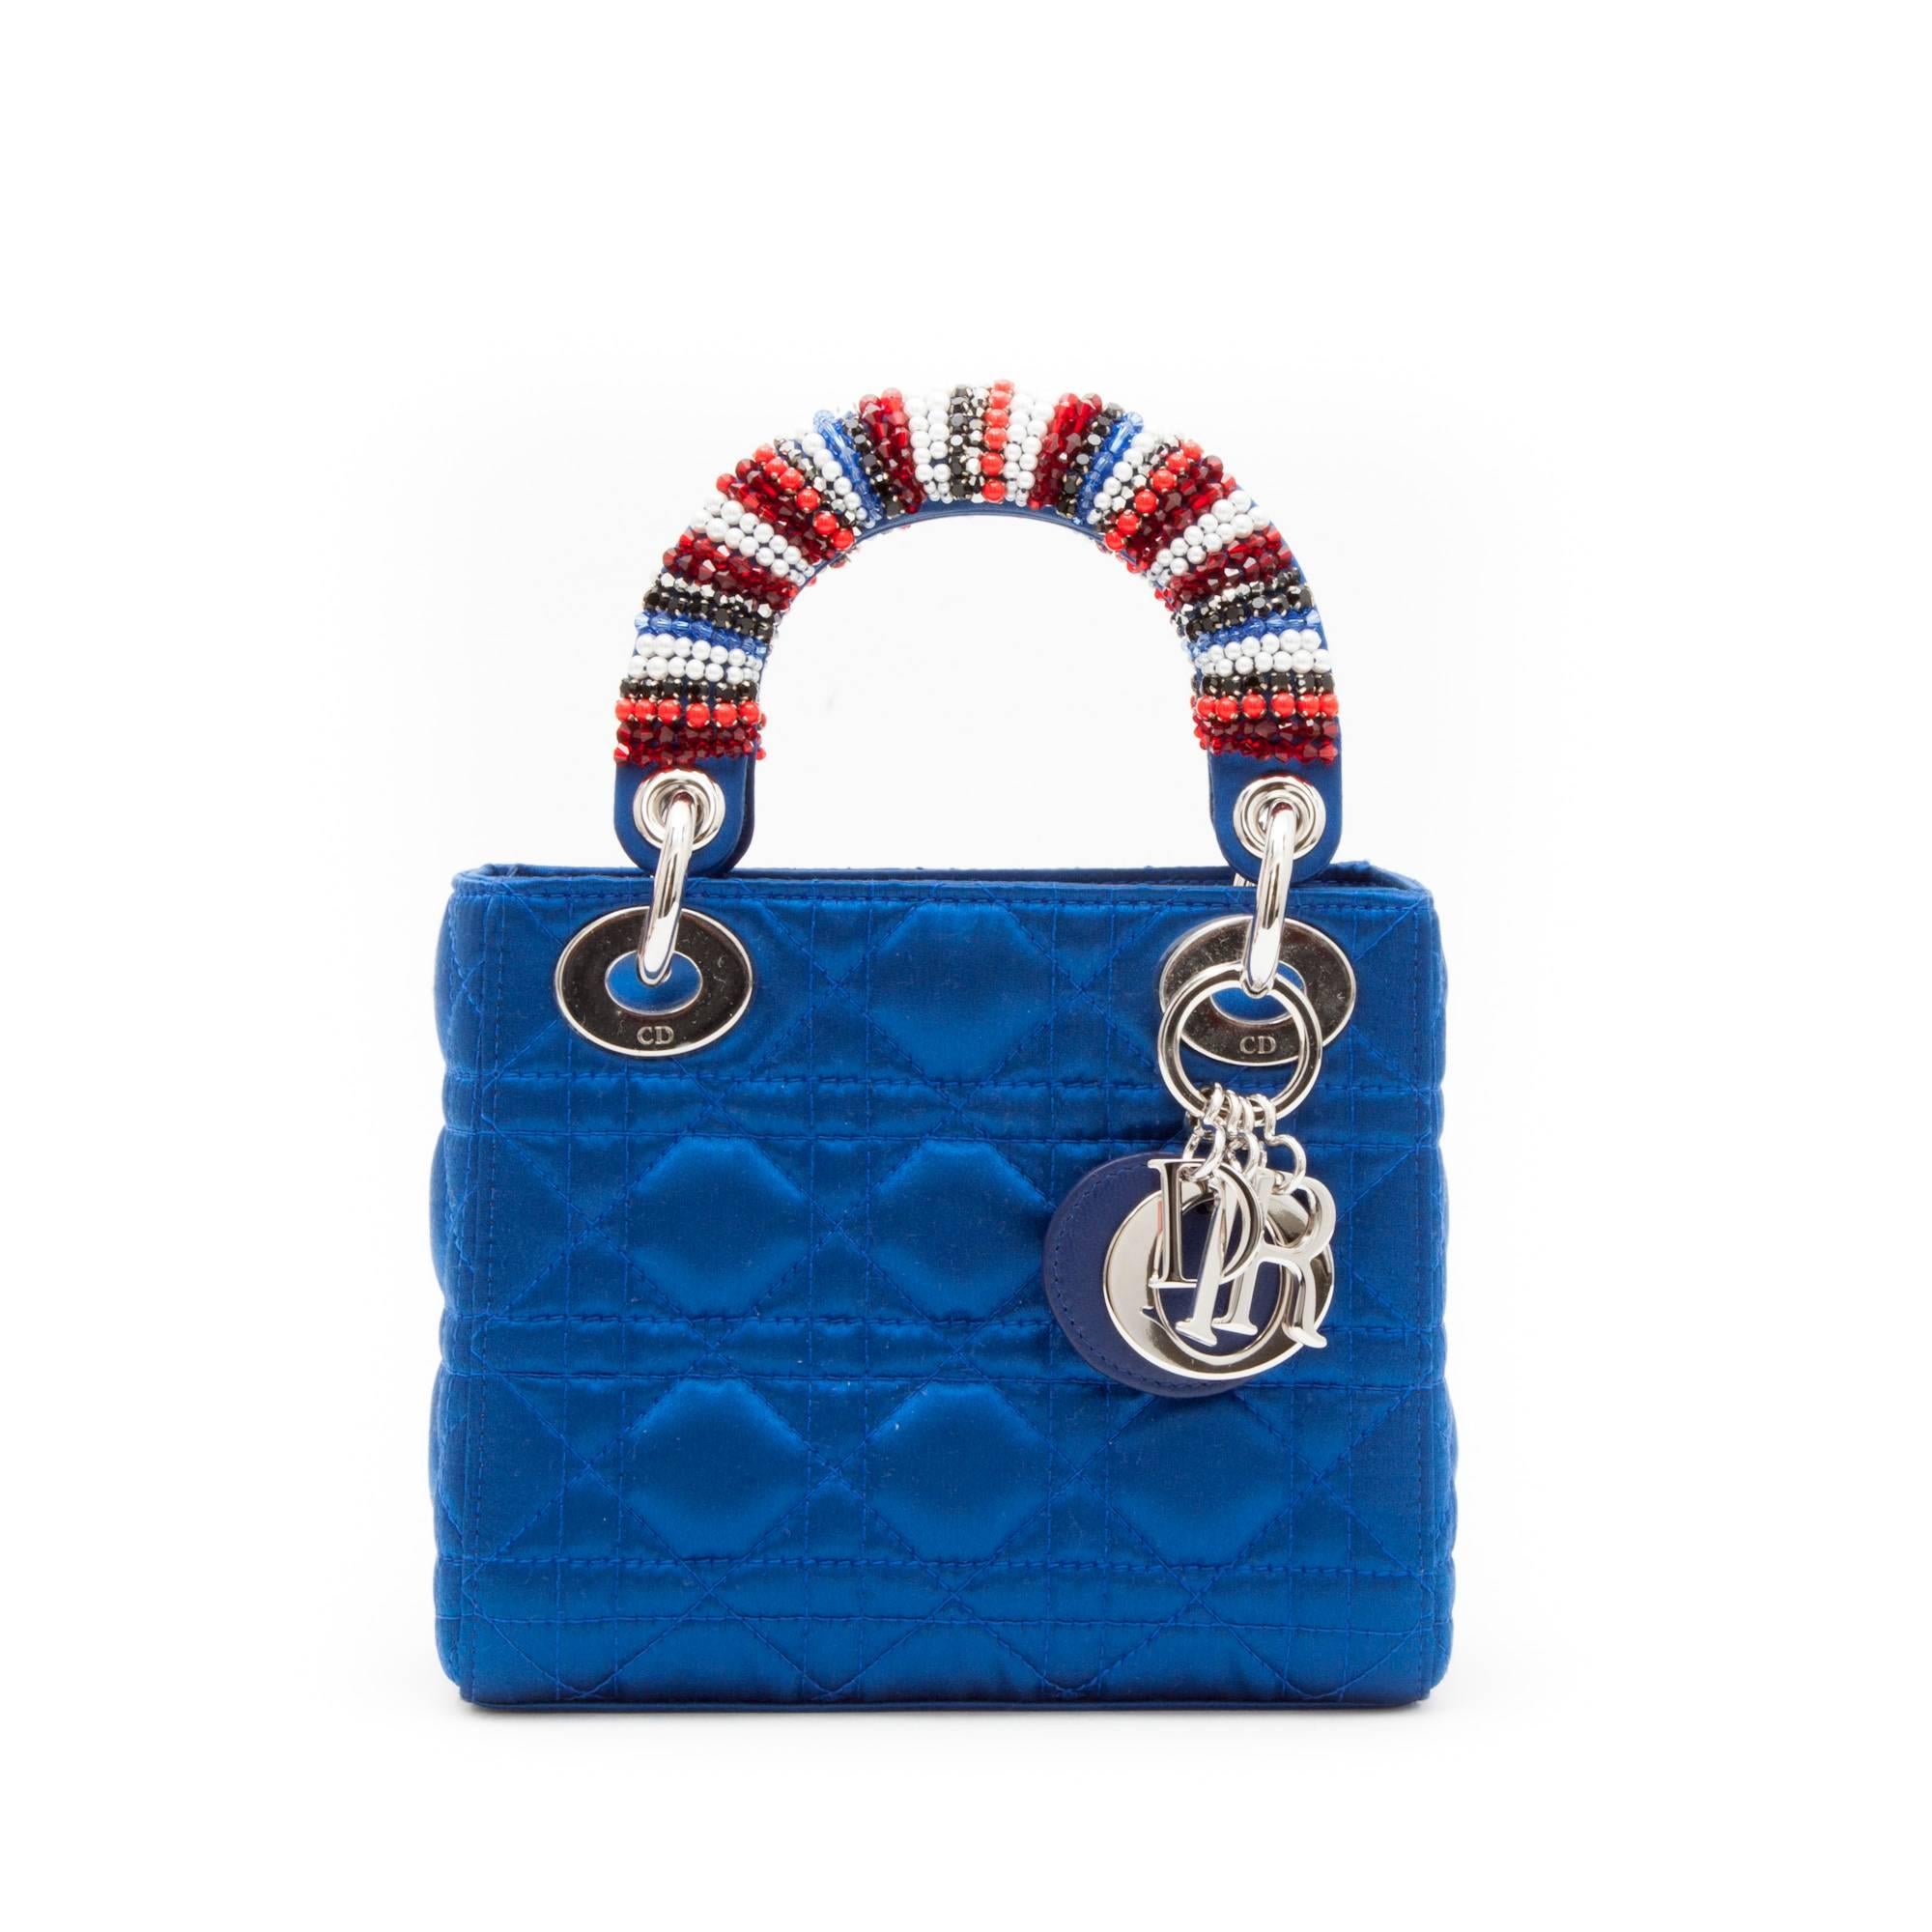 Christian Dior Lady Dior bag in electric blue silk satin, silver D.I.O.R block charms. Pearls and rhinestones set on the handles.

Worn on shoulder with a removable shoulder strap of 110 cm.

Height of the small handle: 9 cm.

Will be delivered in